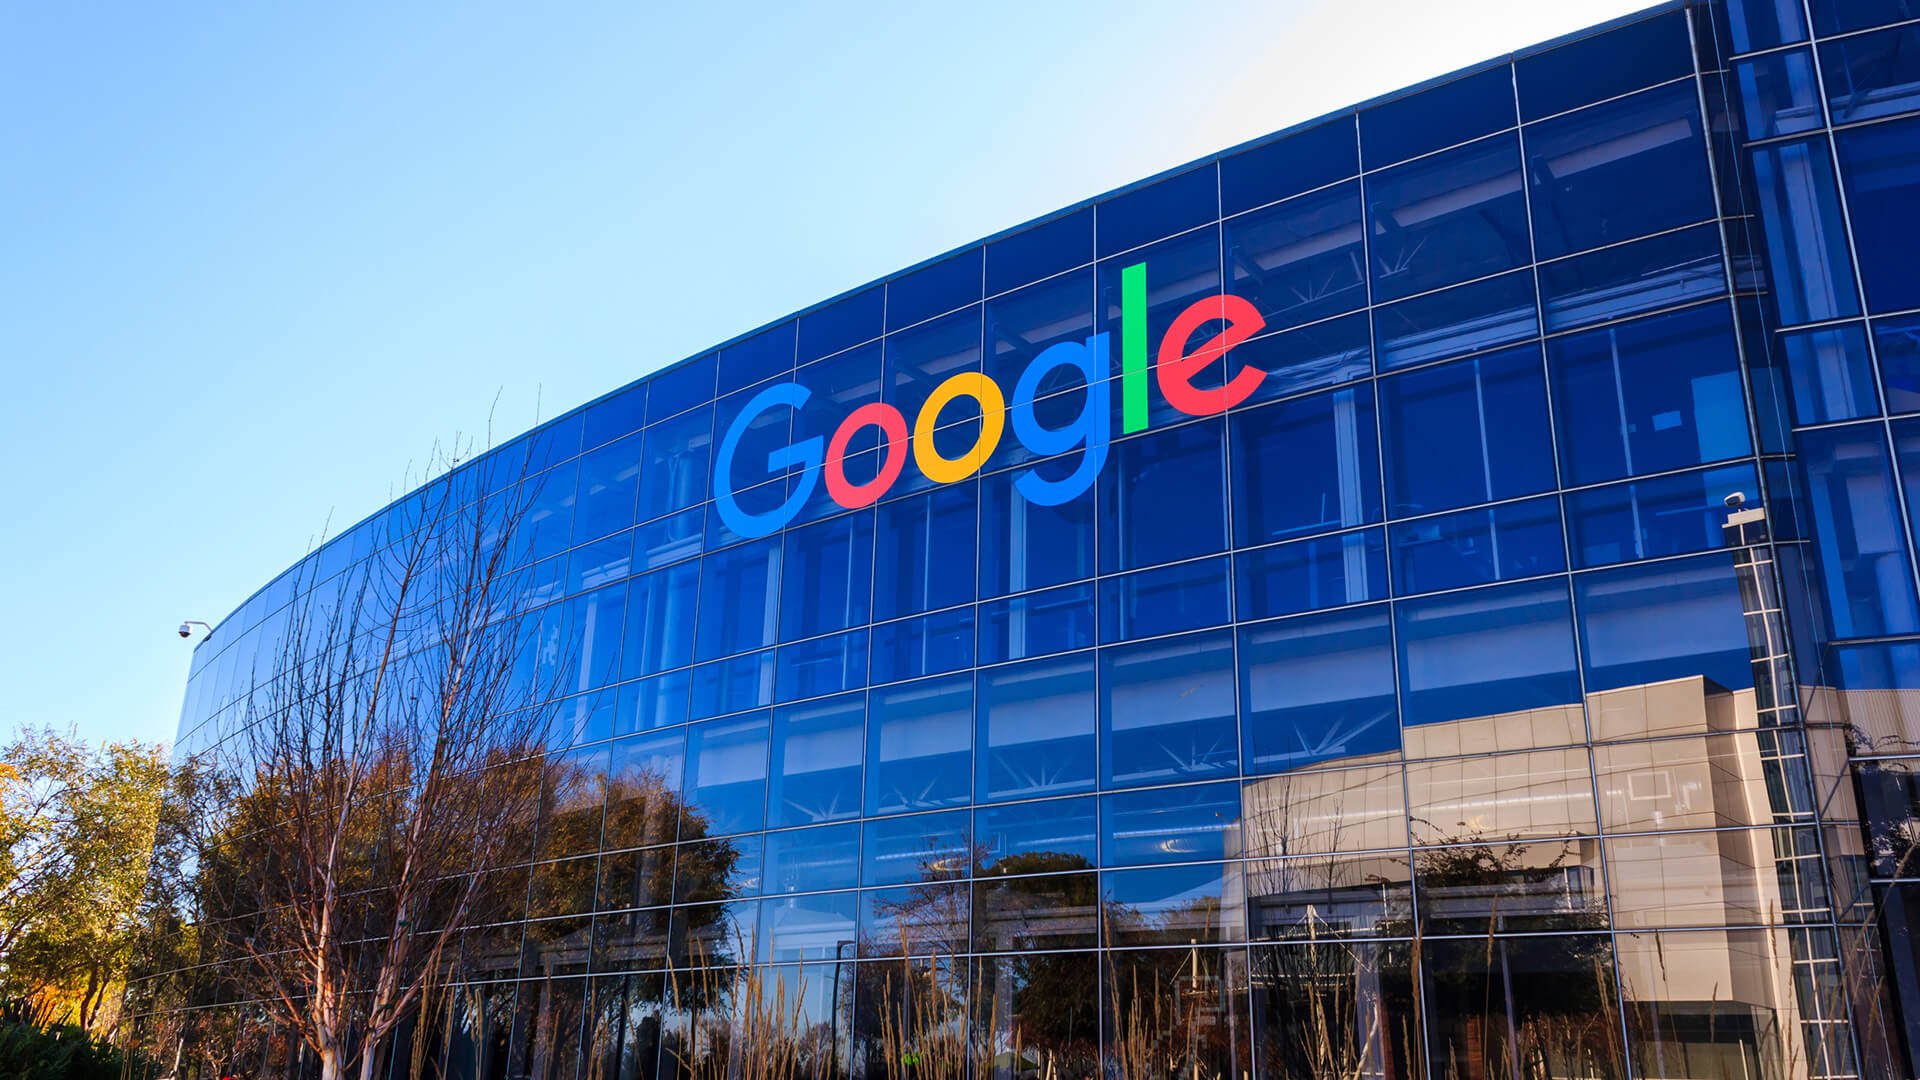 Google is reportedly working on a gaming platform to compete with Xbox and PlayStation